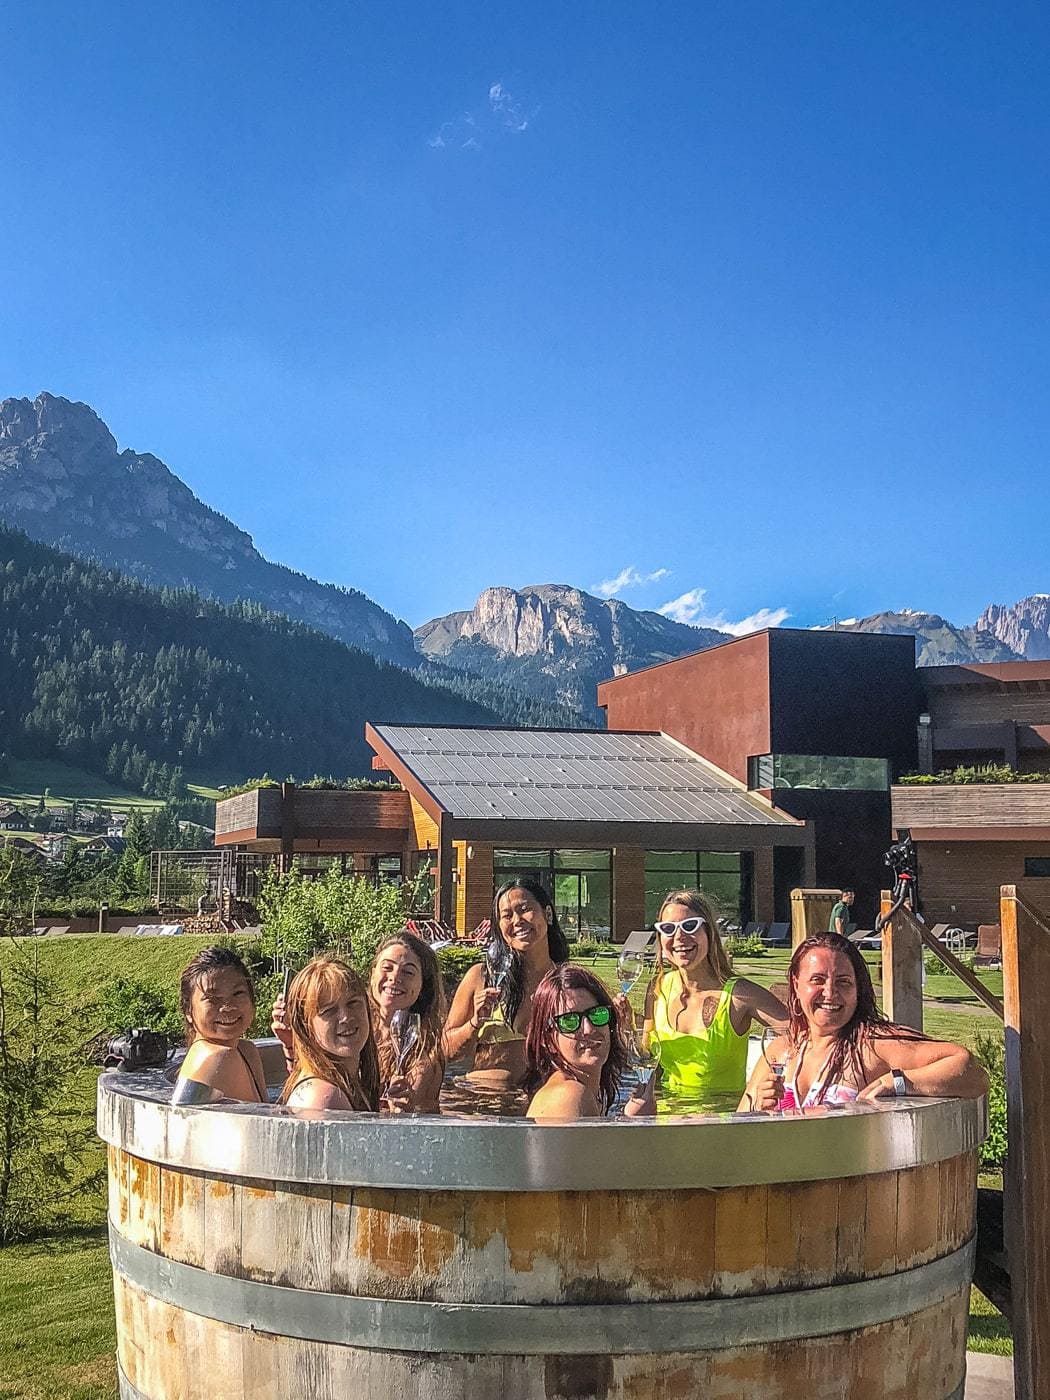 a group of women influencers in a hot tub at qc terme dolomiti